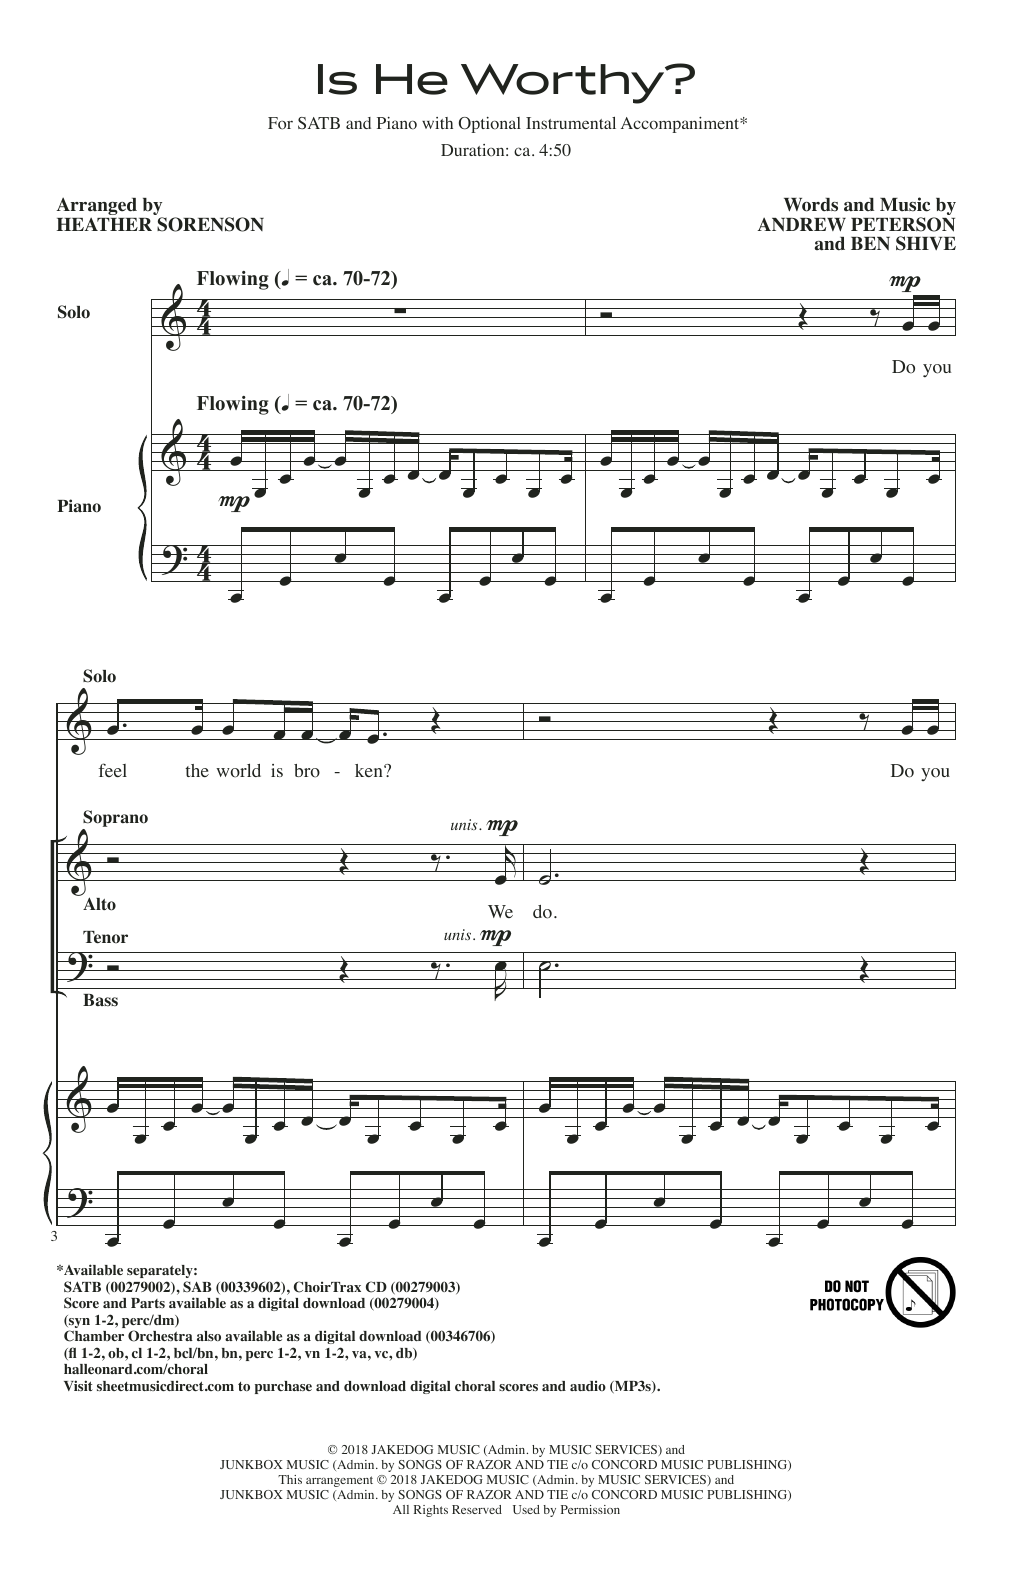 Download Andrew Peterson and Ben Shive Is He Worthy? (arr. Heather Sorenson) Sheet Music